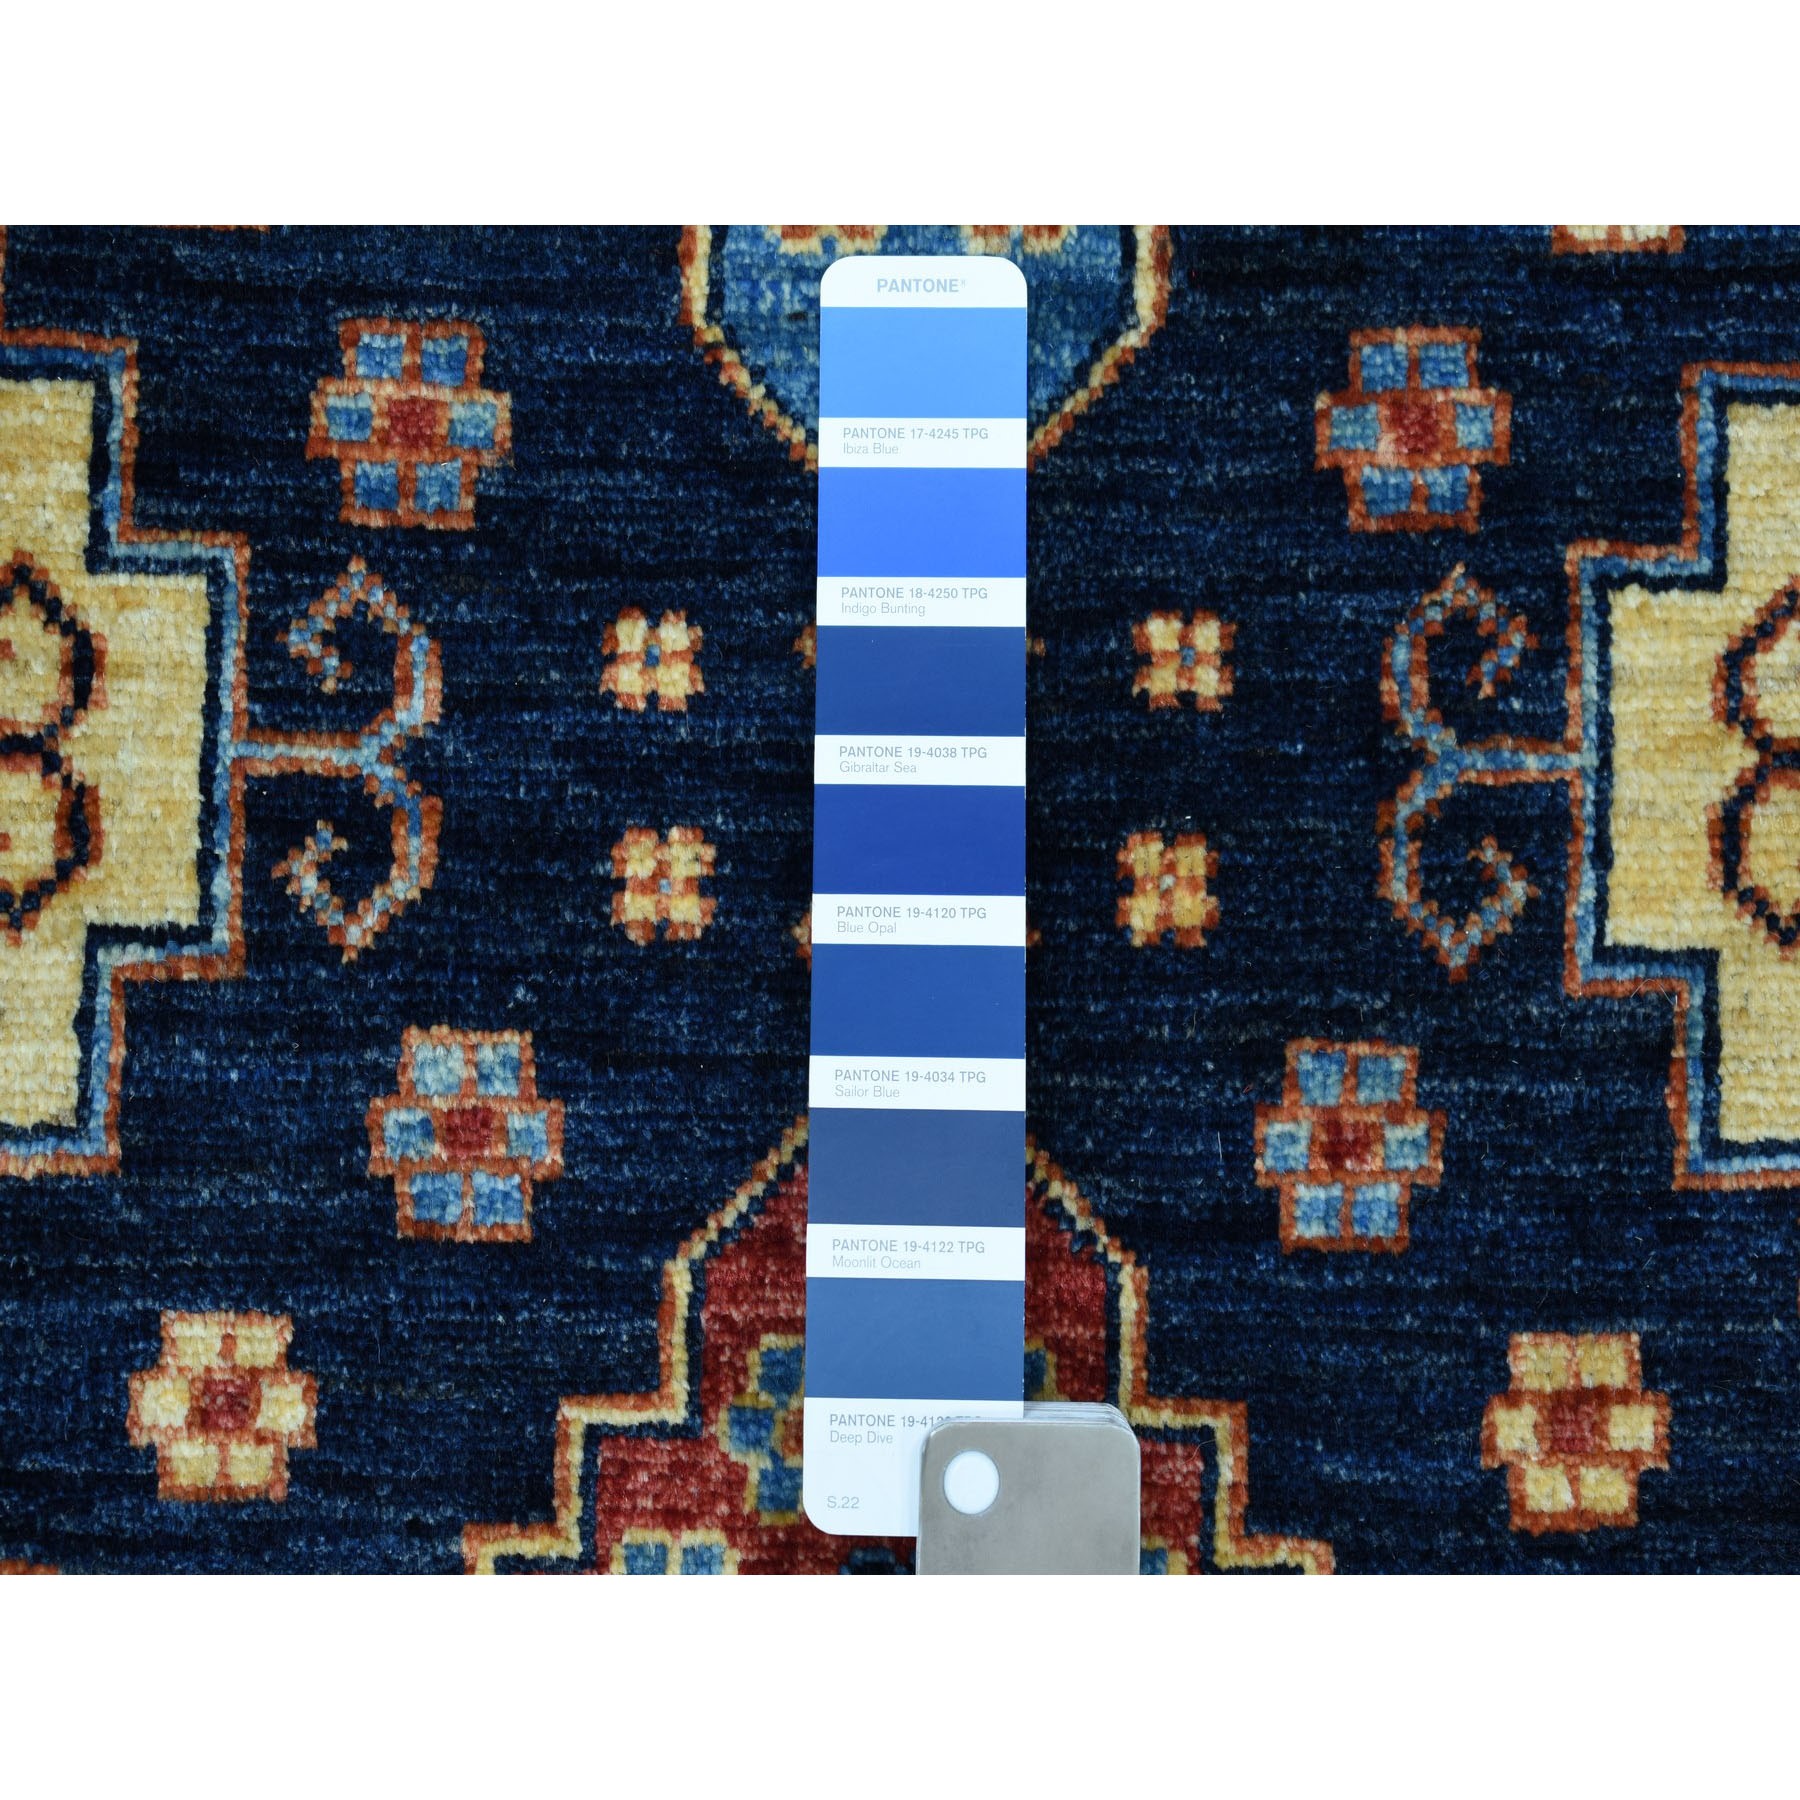 9-x11-9  Blue Afghan Turkoman Ersari All Over Design Pure Wool Hand Knotted Oriental Rug 